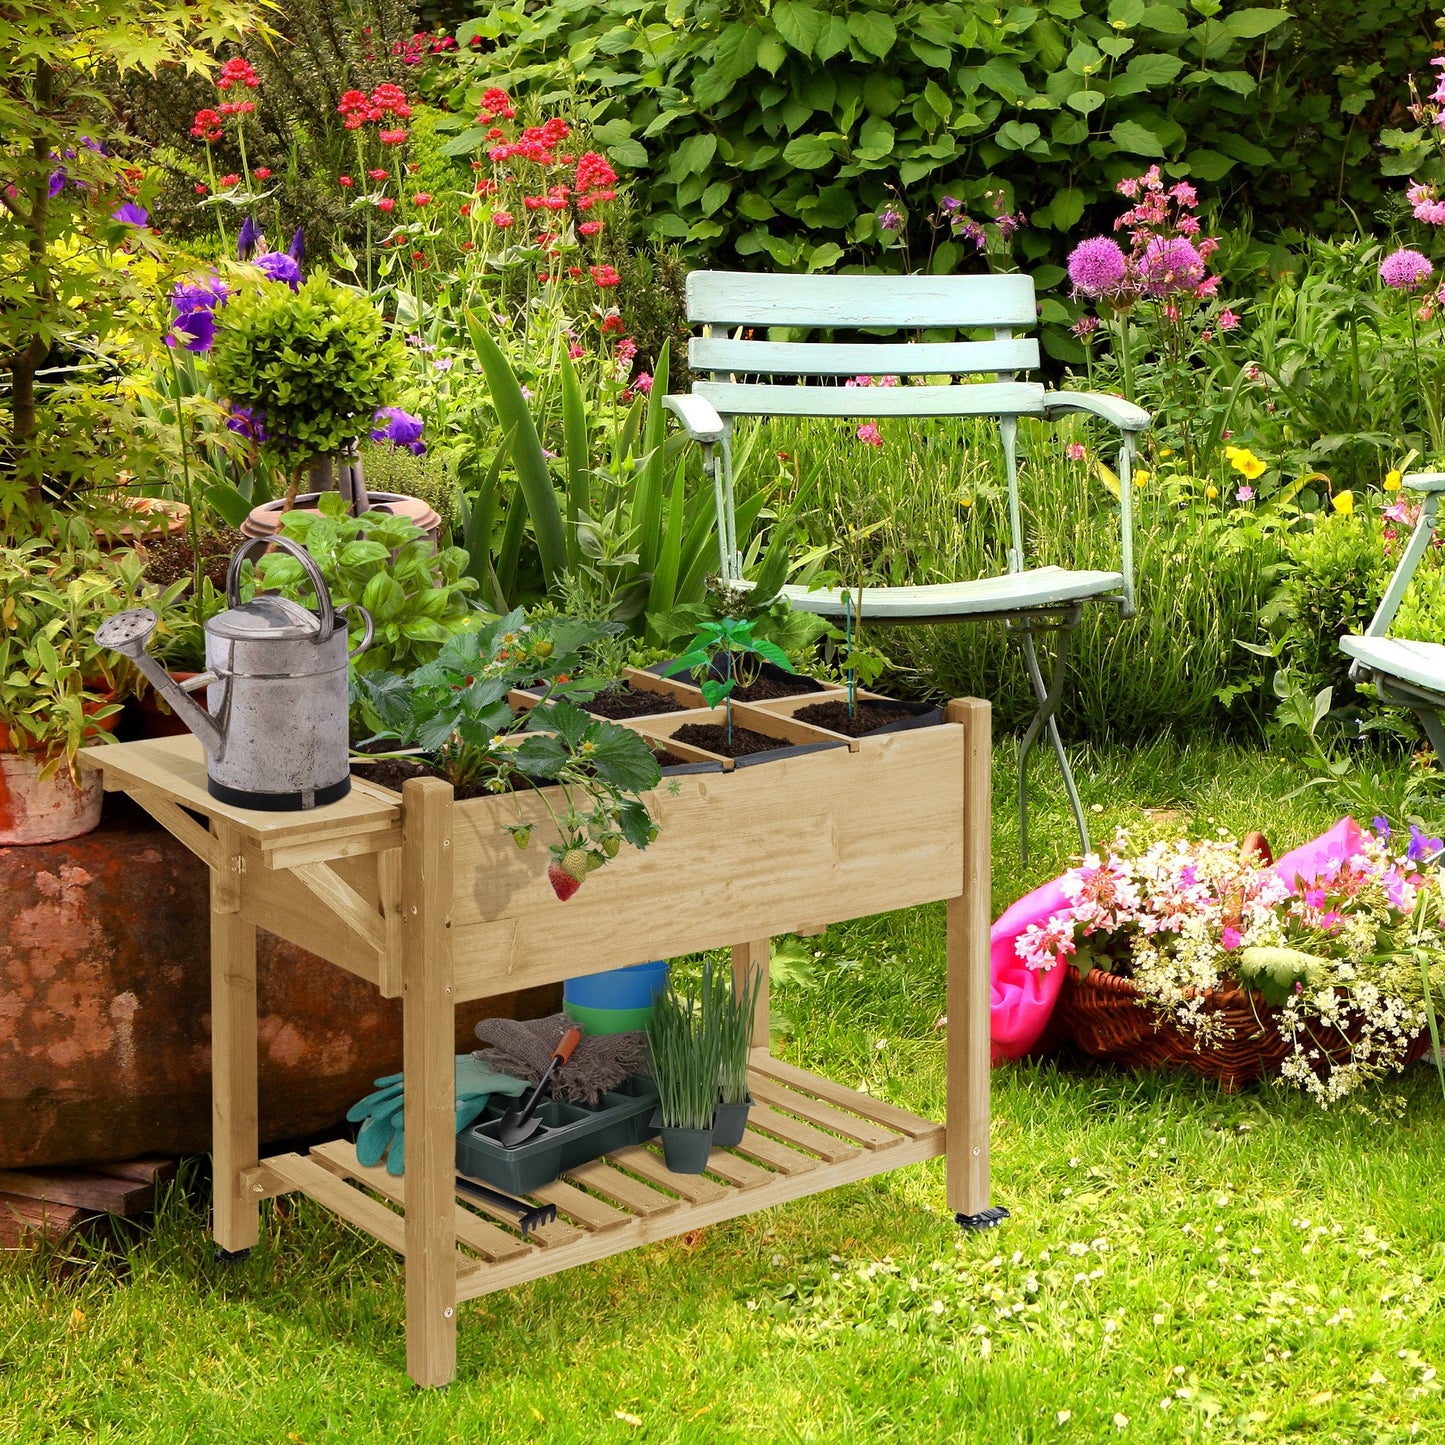 Outdoor and Garden-Garden Bed Raised Planter Boxes, storage Shelving & Lockable Wheels - Outdoor Style Company